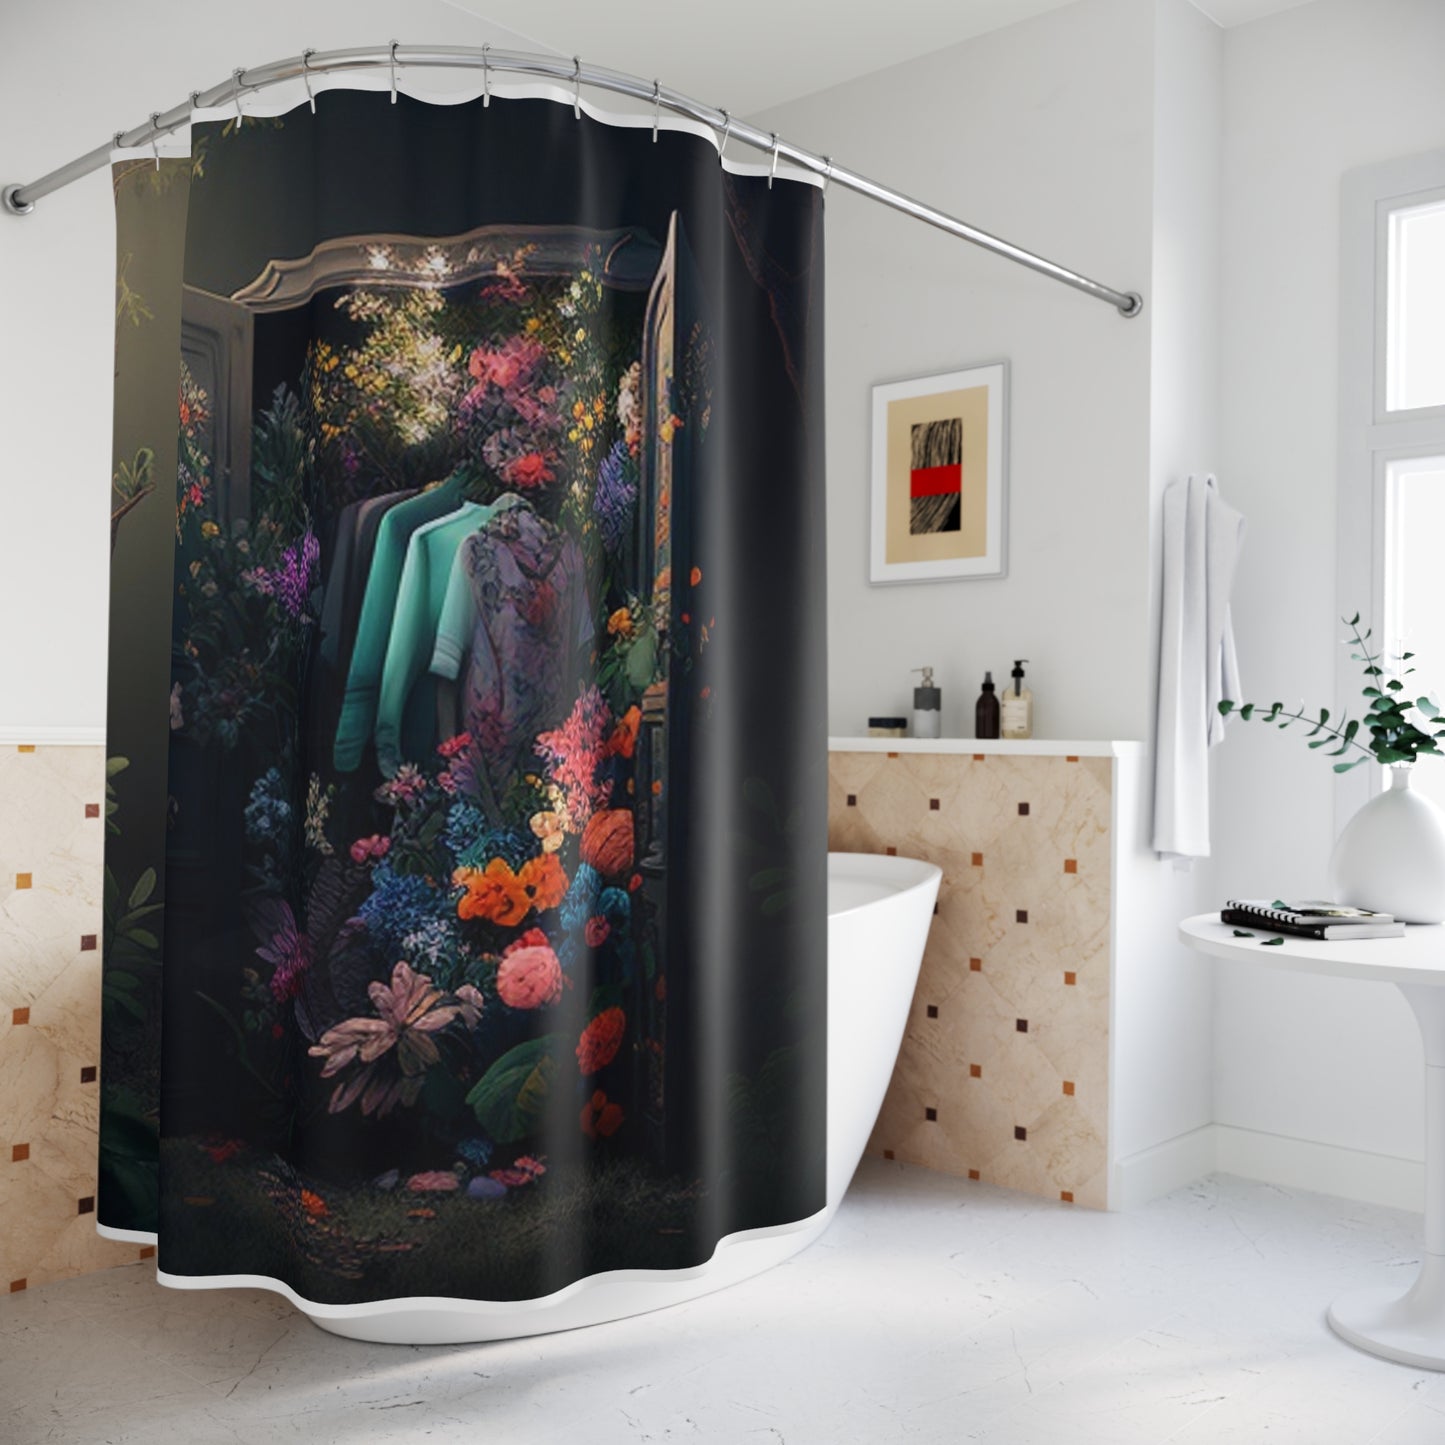 Polyester Shower Curtain A Wardrobe Surrounded by Flowers 1